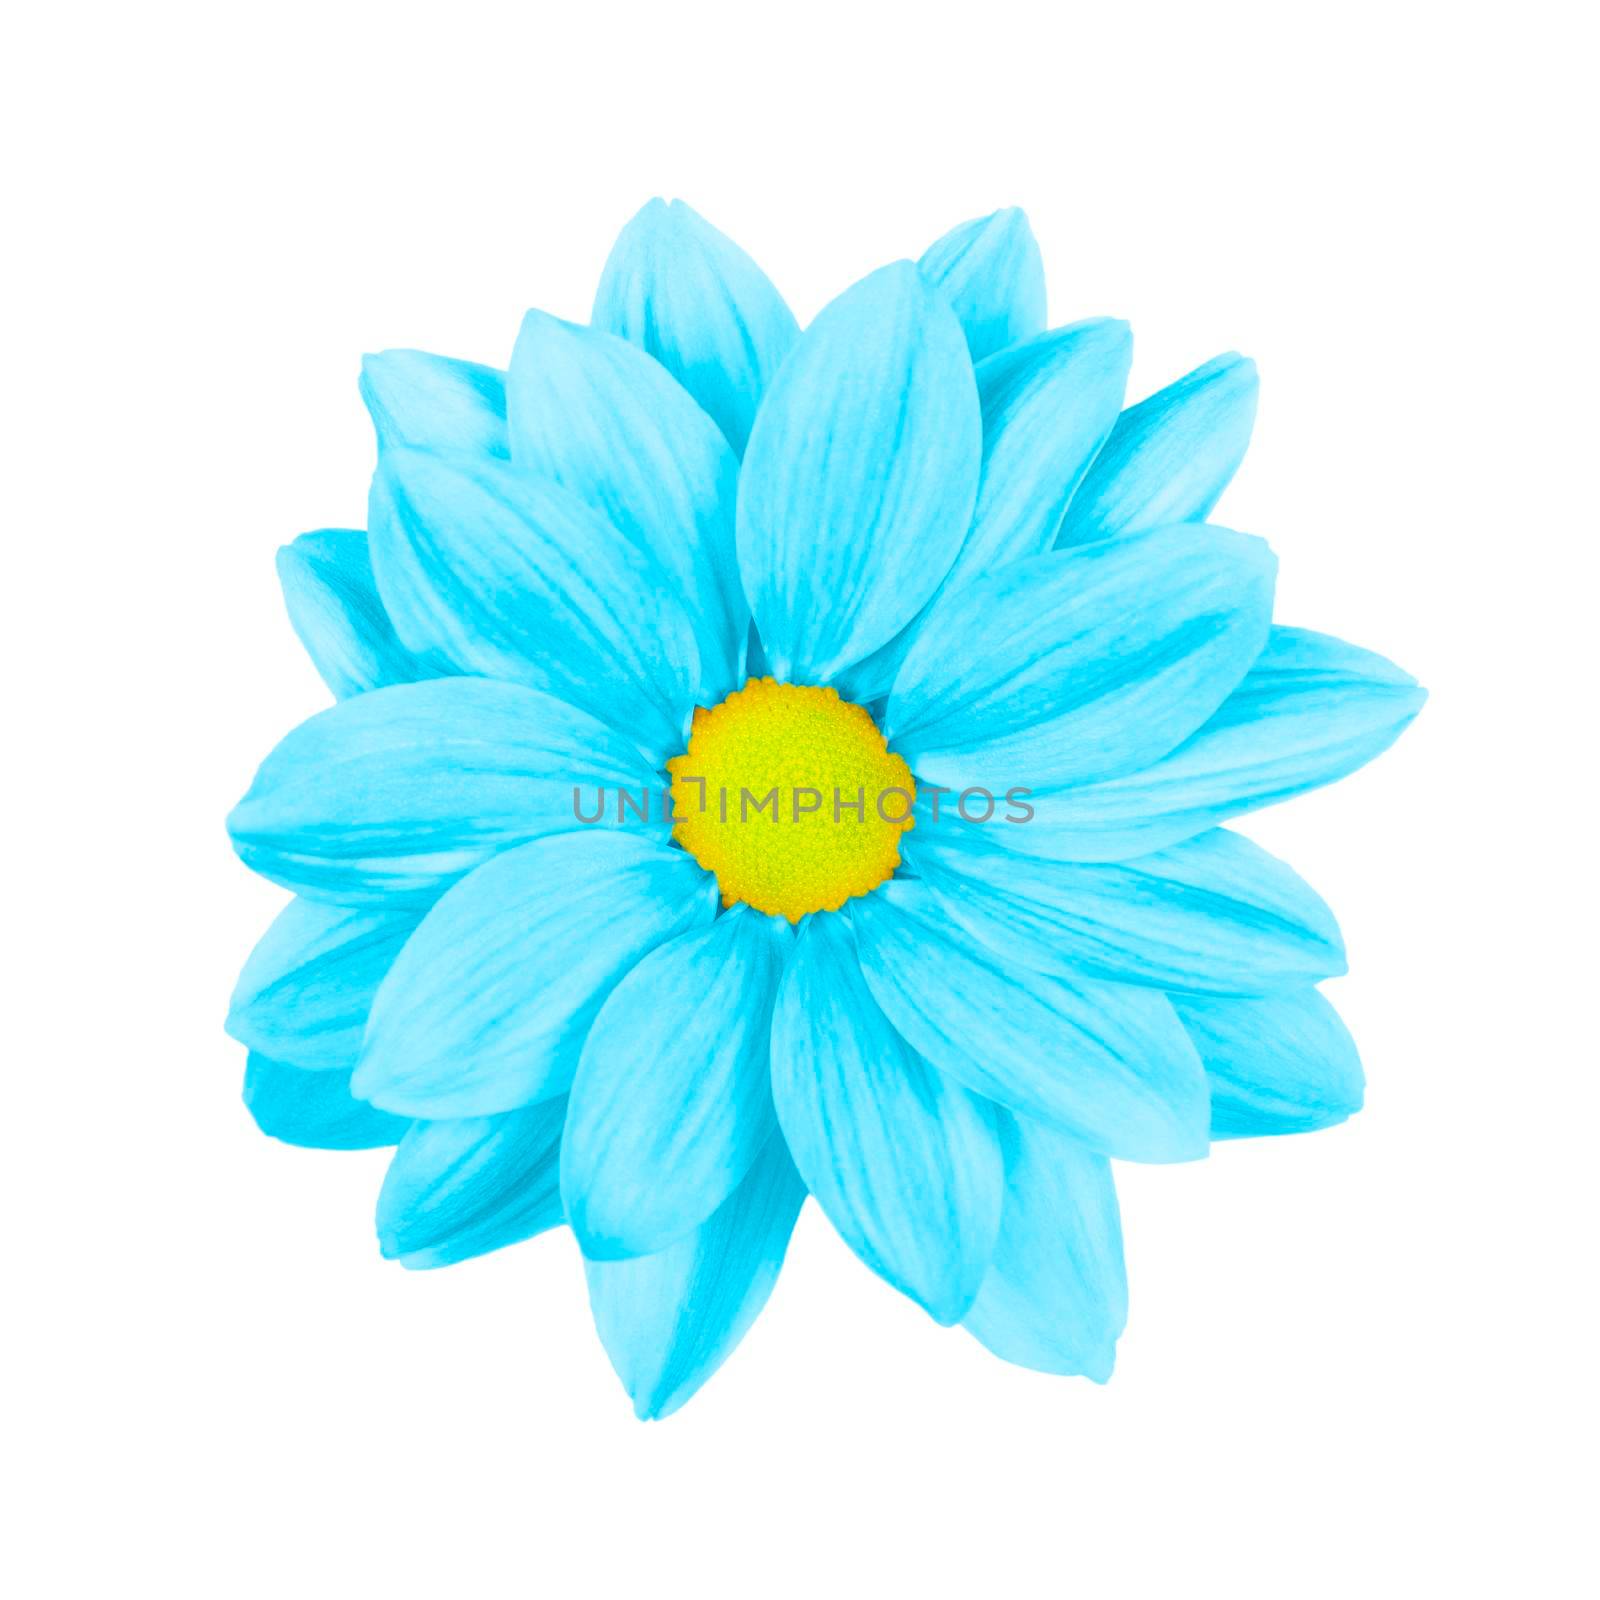 Light blue daisy, chamomile or chrysanthemum macro photo isolated on white background. Flower head isolated close up. Top view.